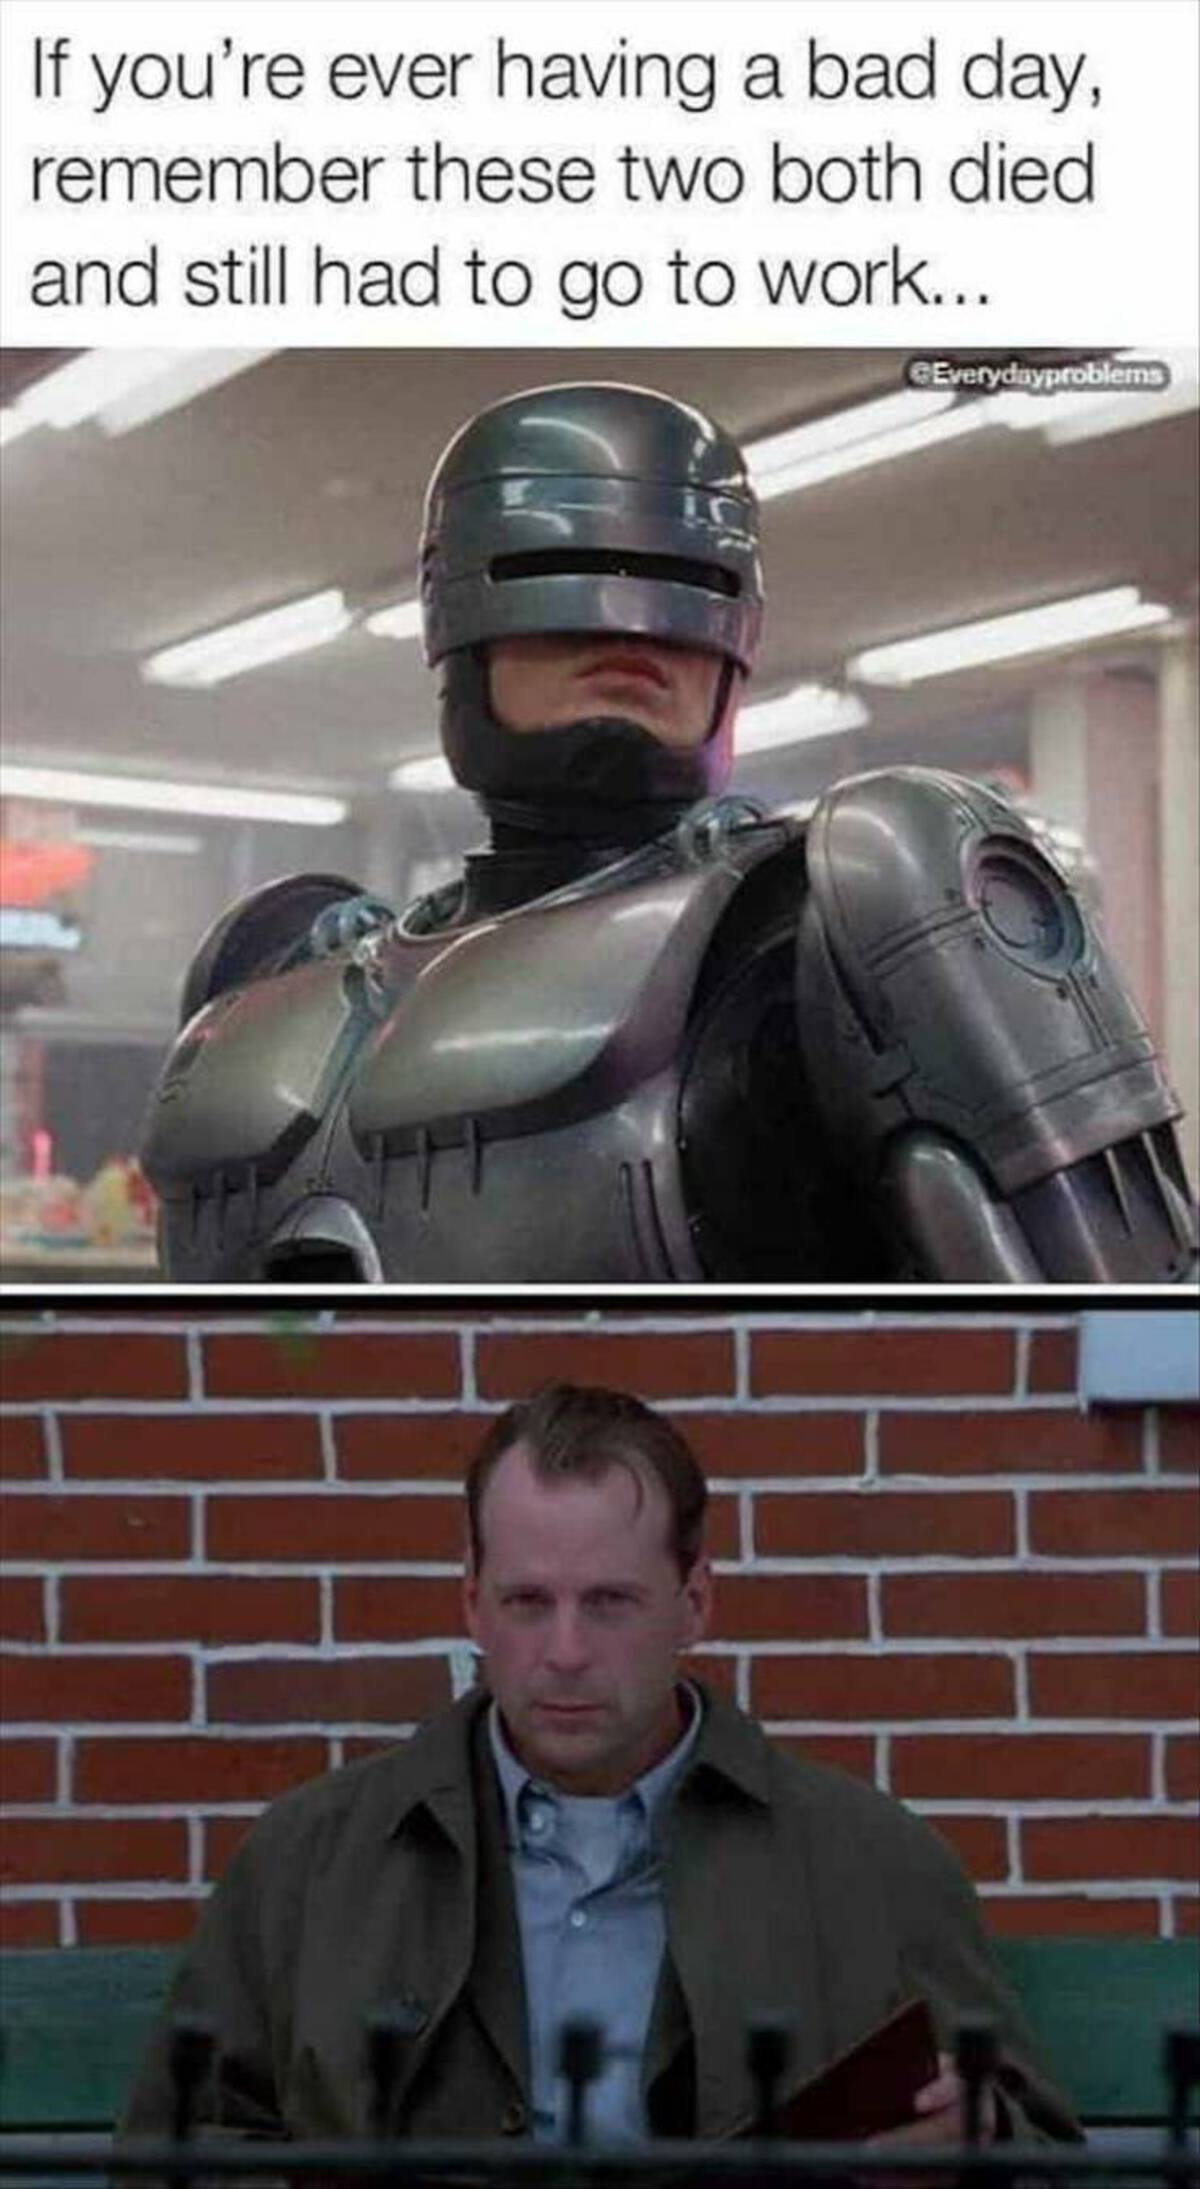 thank you for your cooperation robocop - If you're ever having a bad day, remember these two both died and still had to go to work... CEverydayproblems